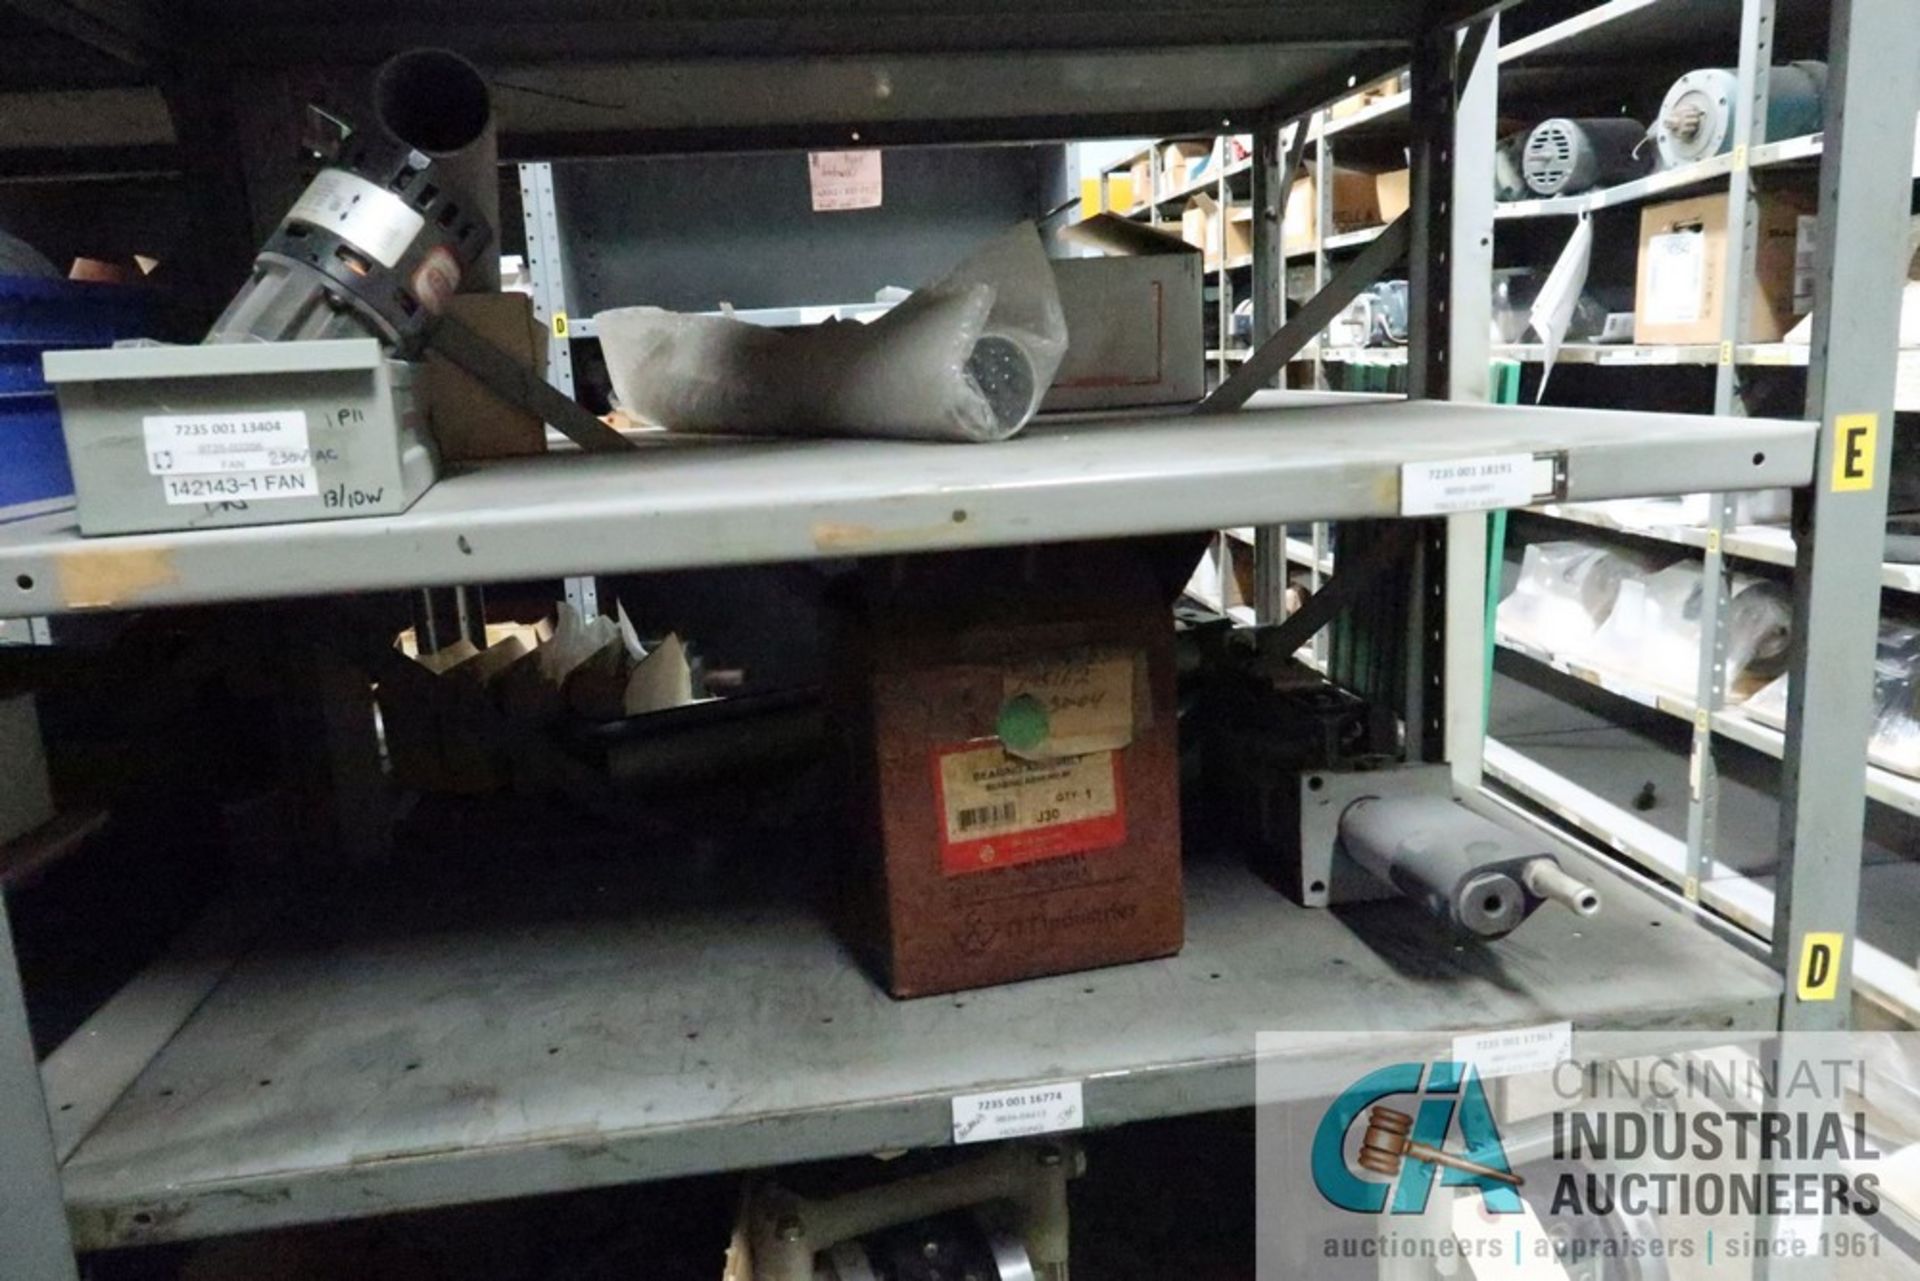 (LOT) (8) SECTIONS STEEL SHELVING W/ MISC. MODULES, CONTROLLERS, VELDING SYSTEMS, PUMPS, LIGHT - Image 10 of 16